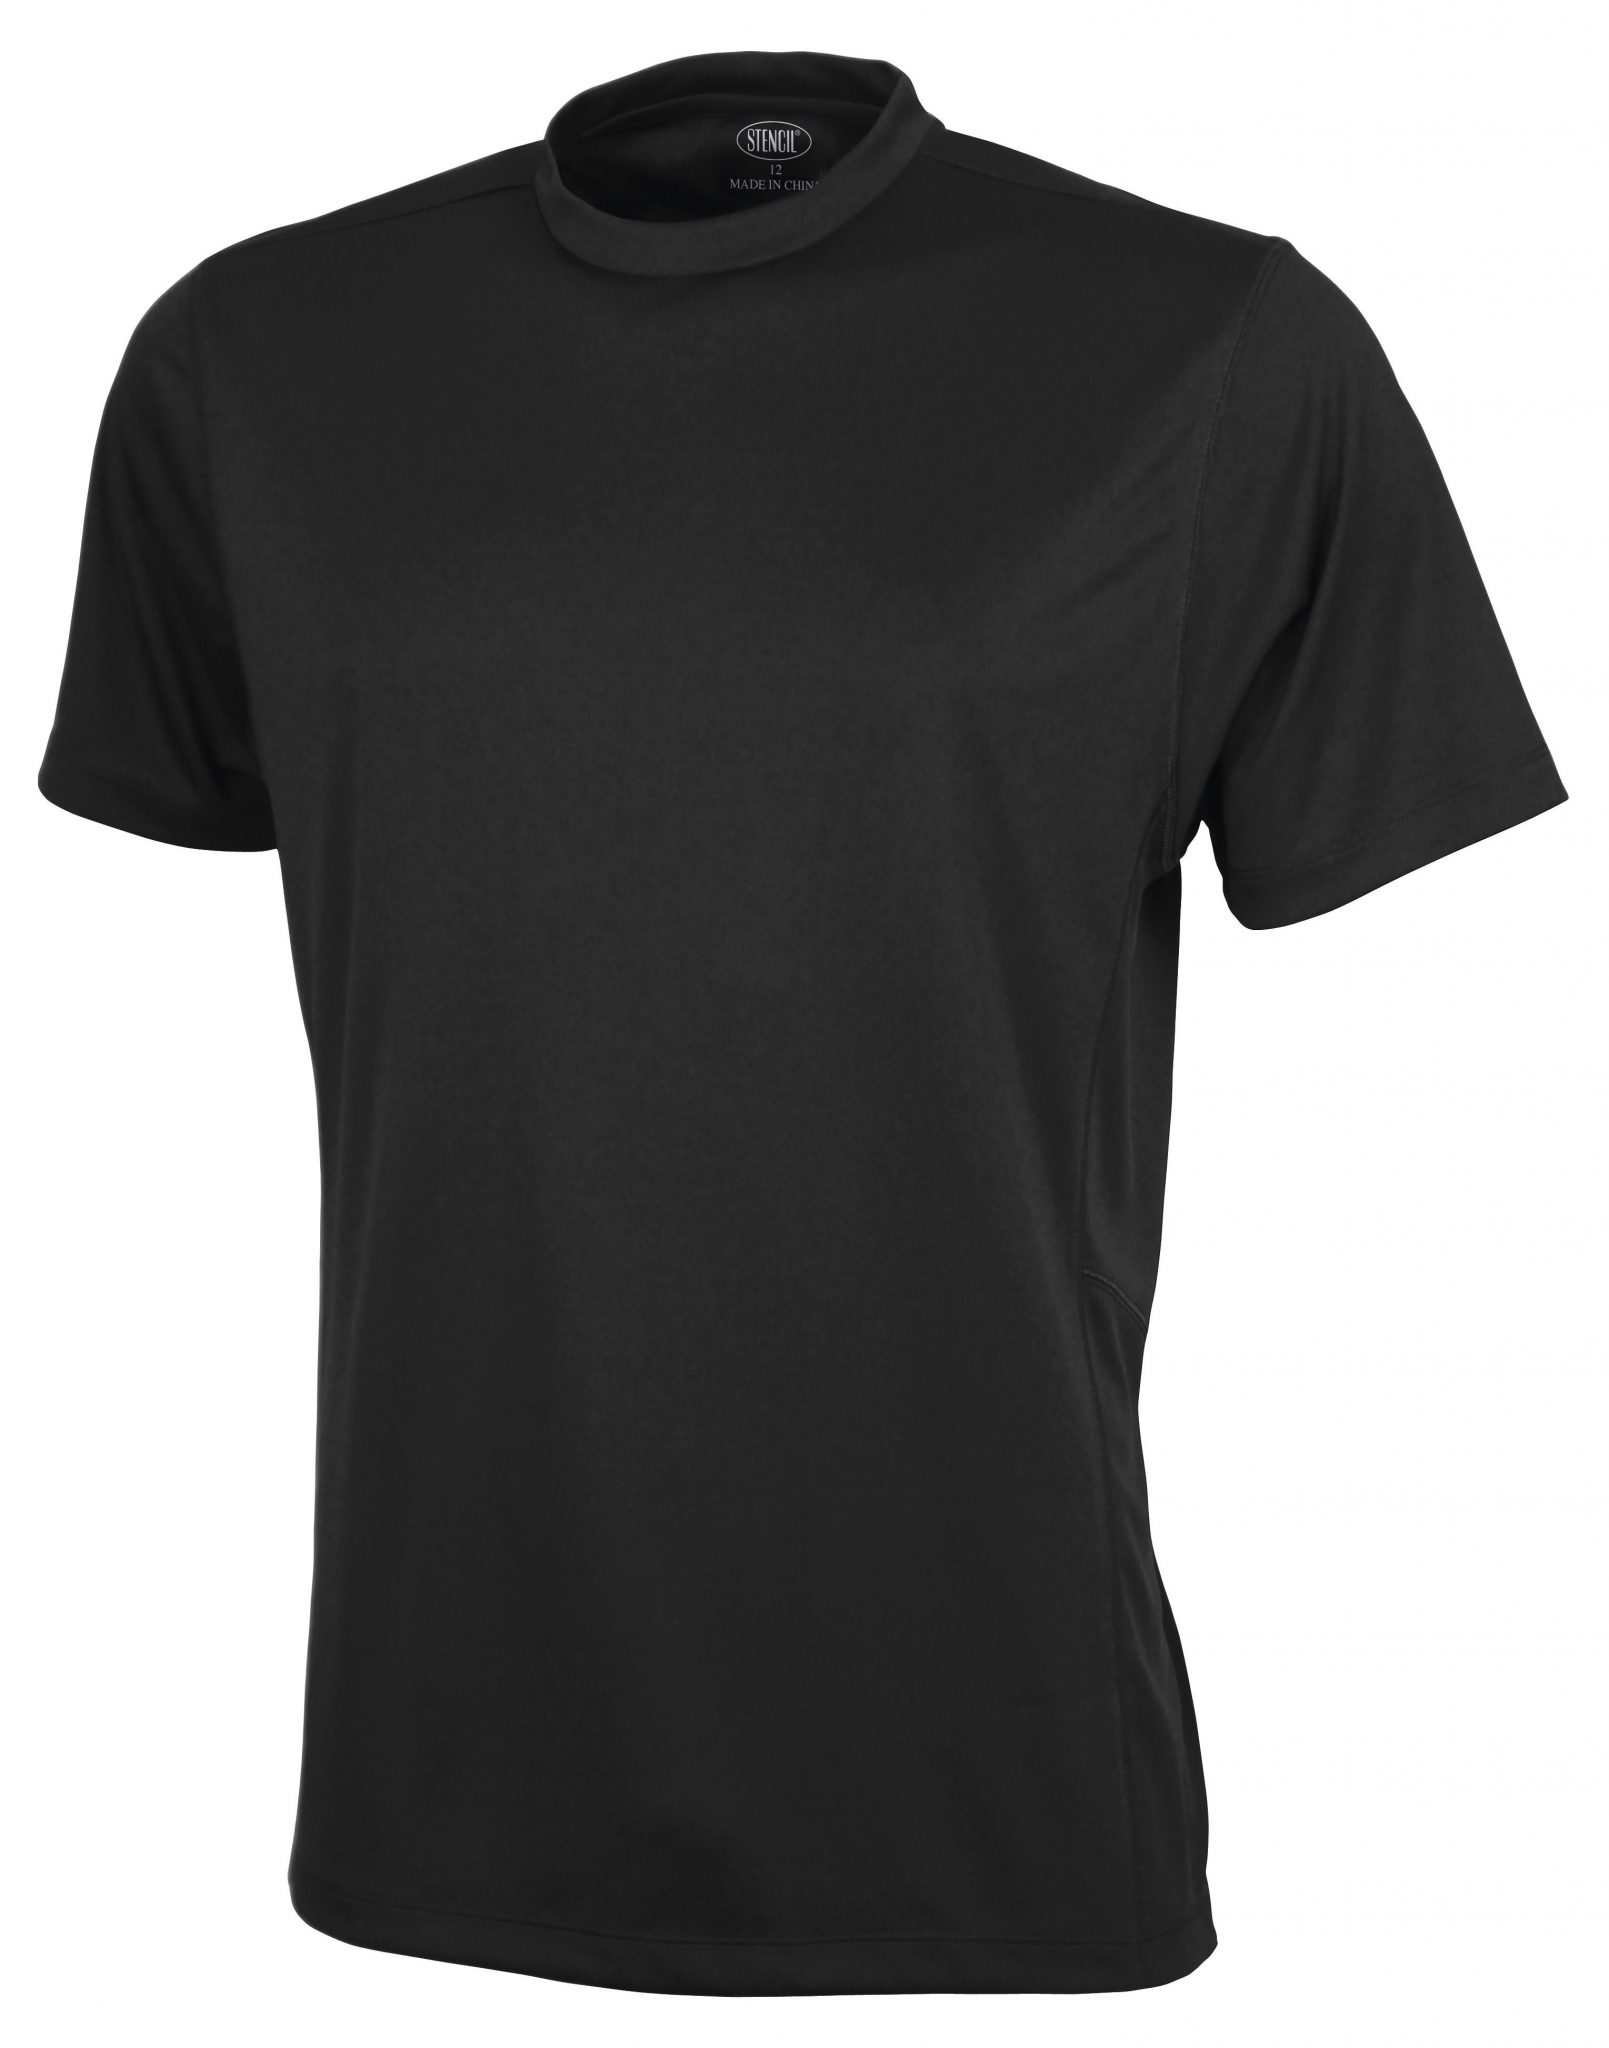 Mens Competitor Tee. 135gsm 100% Polyester - 7013 | Ambition Workwear